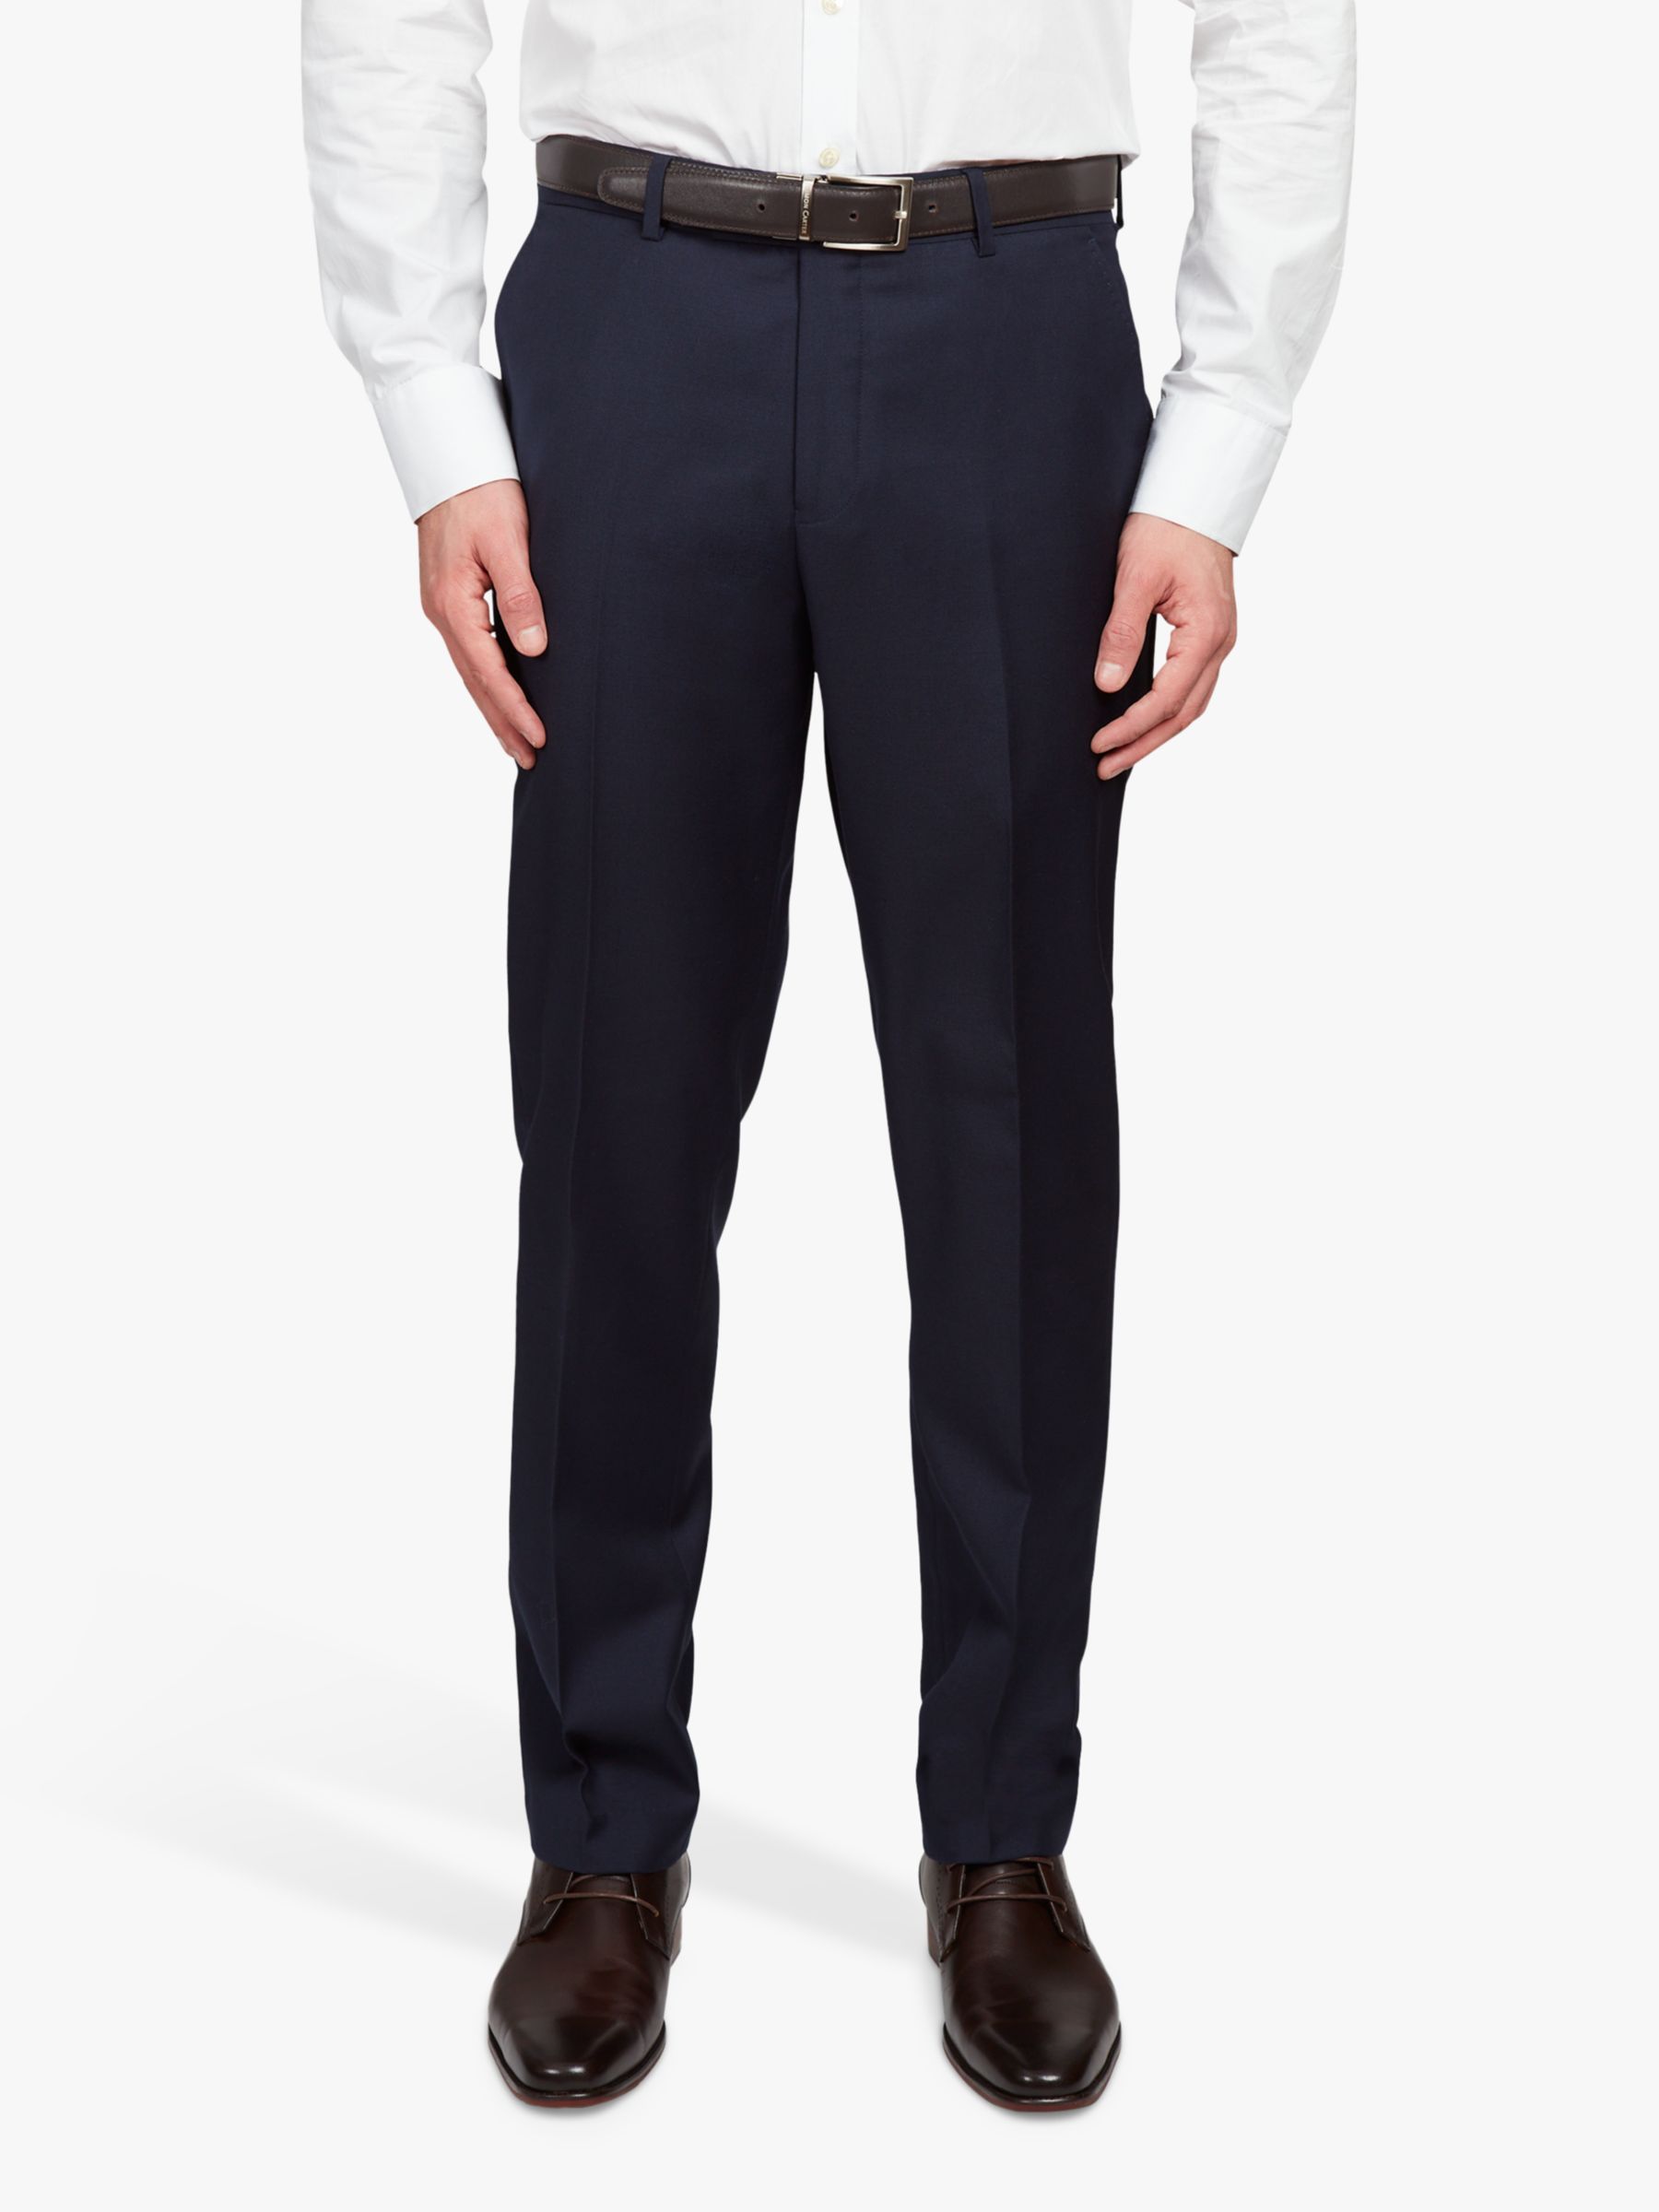 Simon Carter Grant Wool Tailored Fit Suit Trousers, Navy